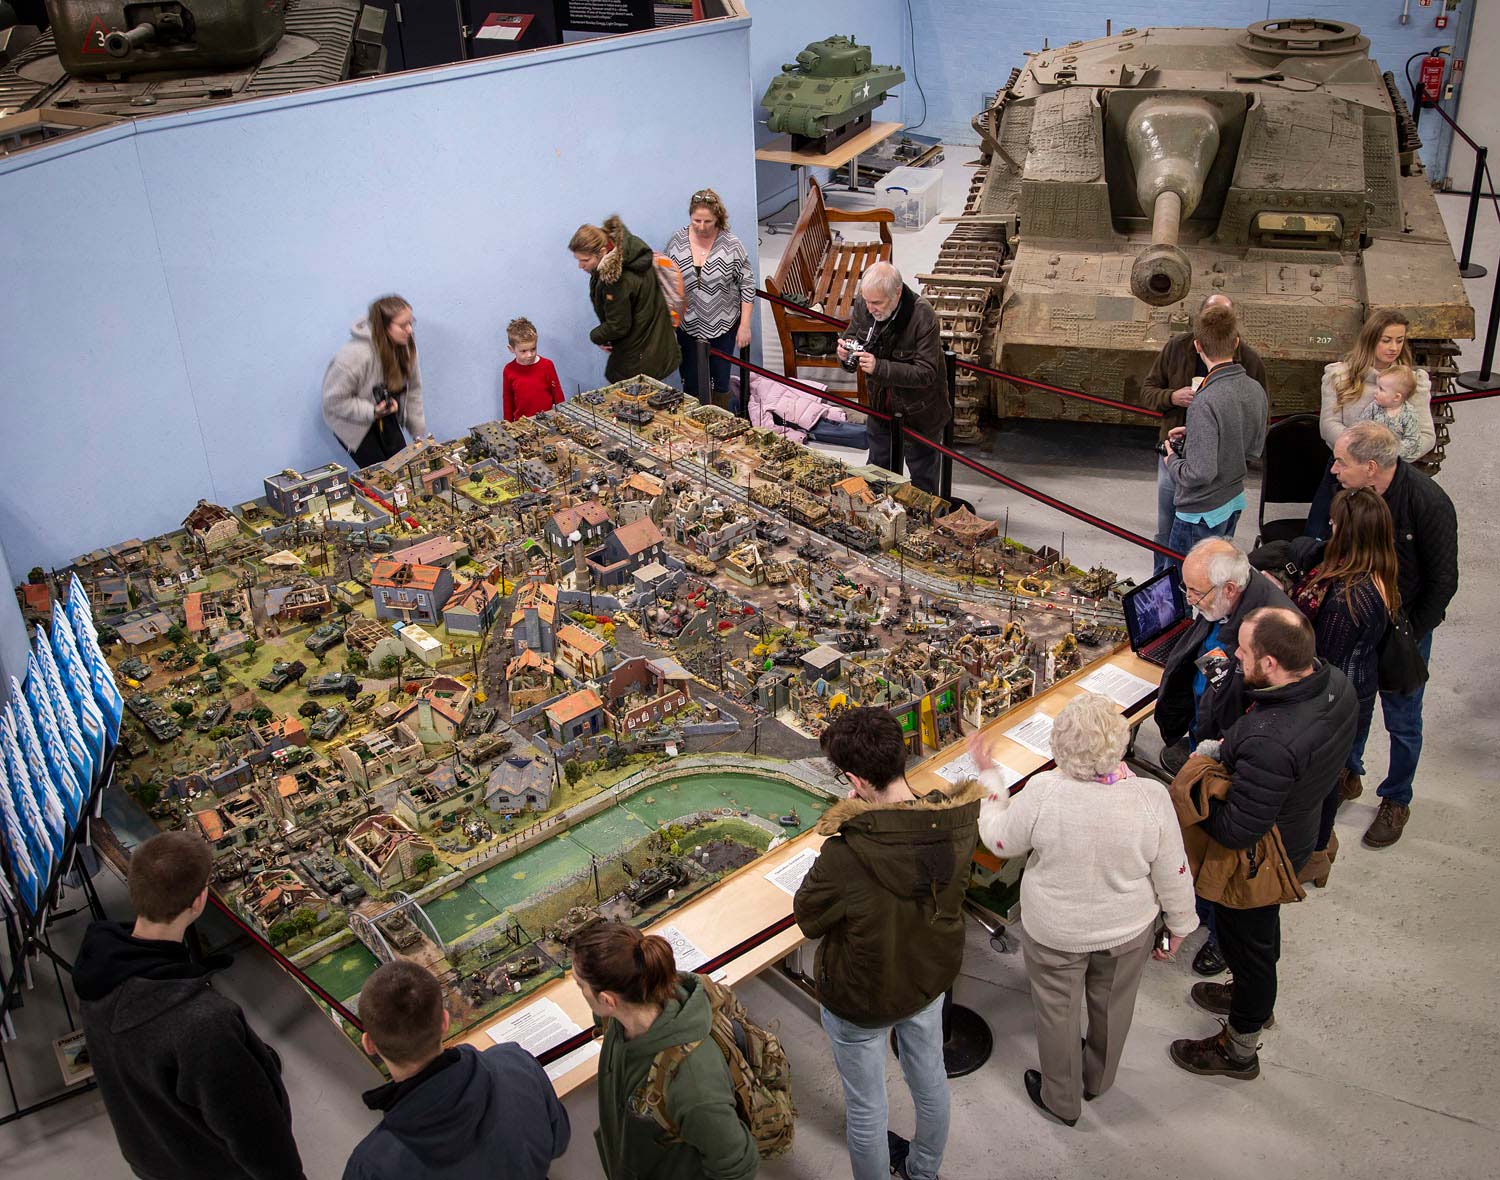 A giant scale model of a WW2 scene installed at The Tank Museum